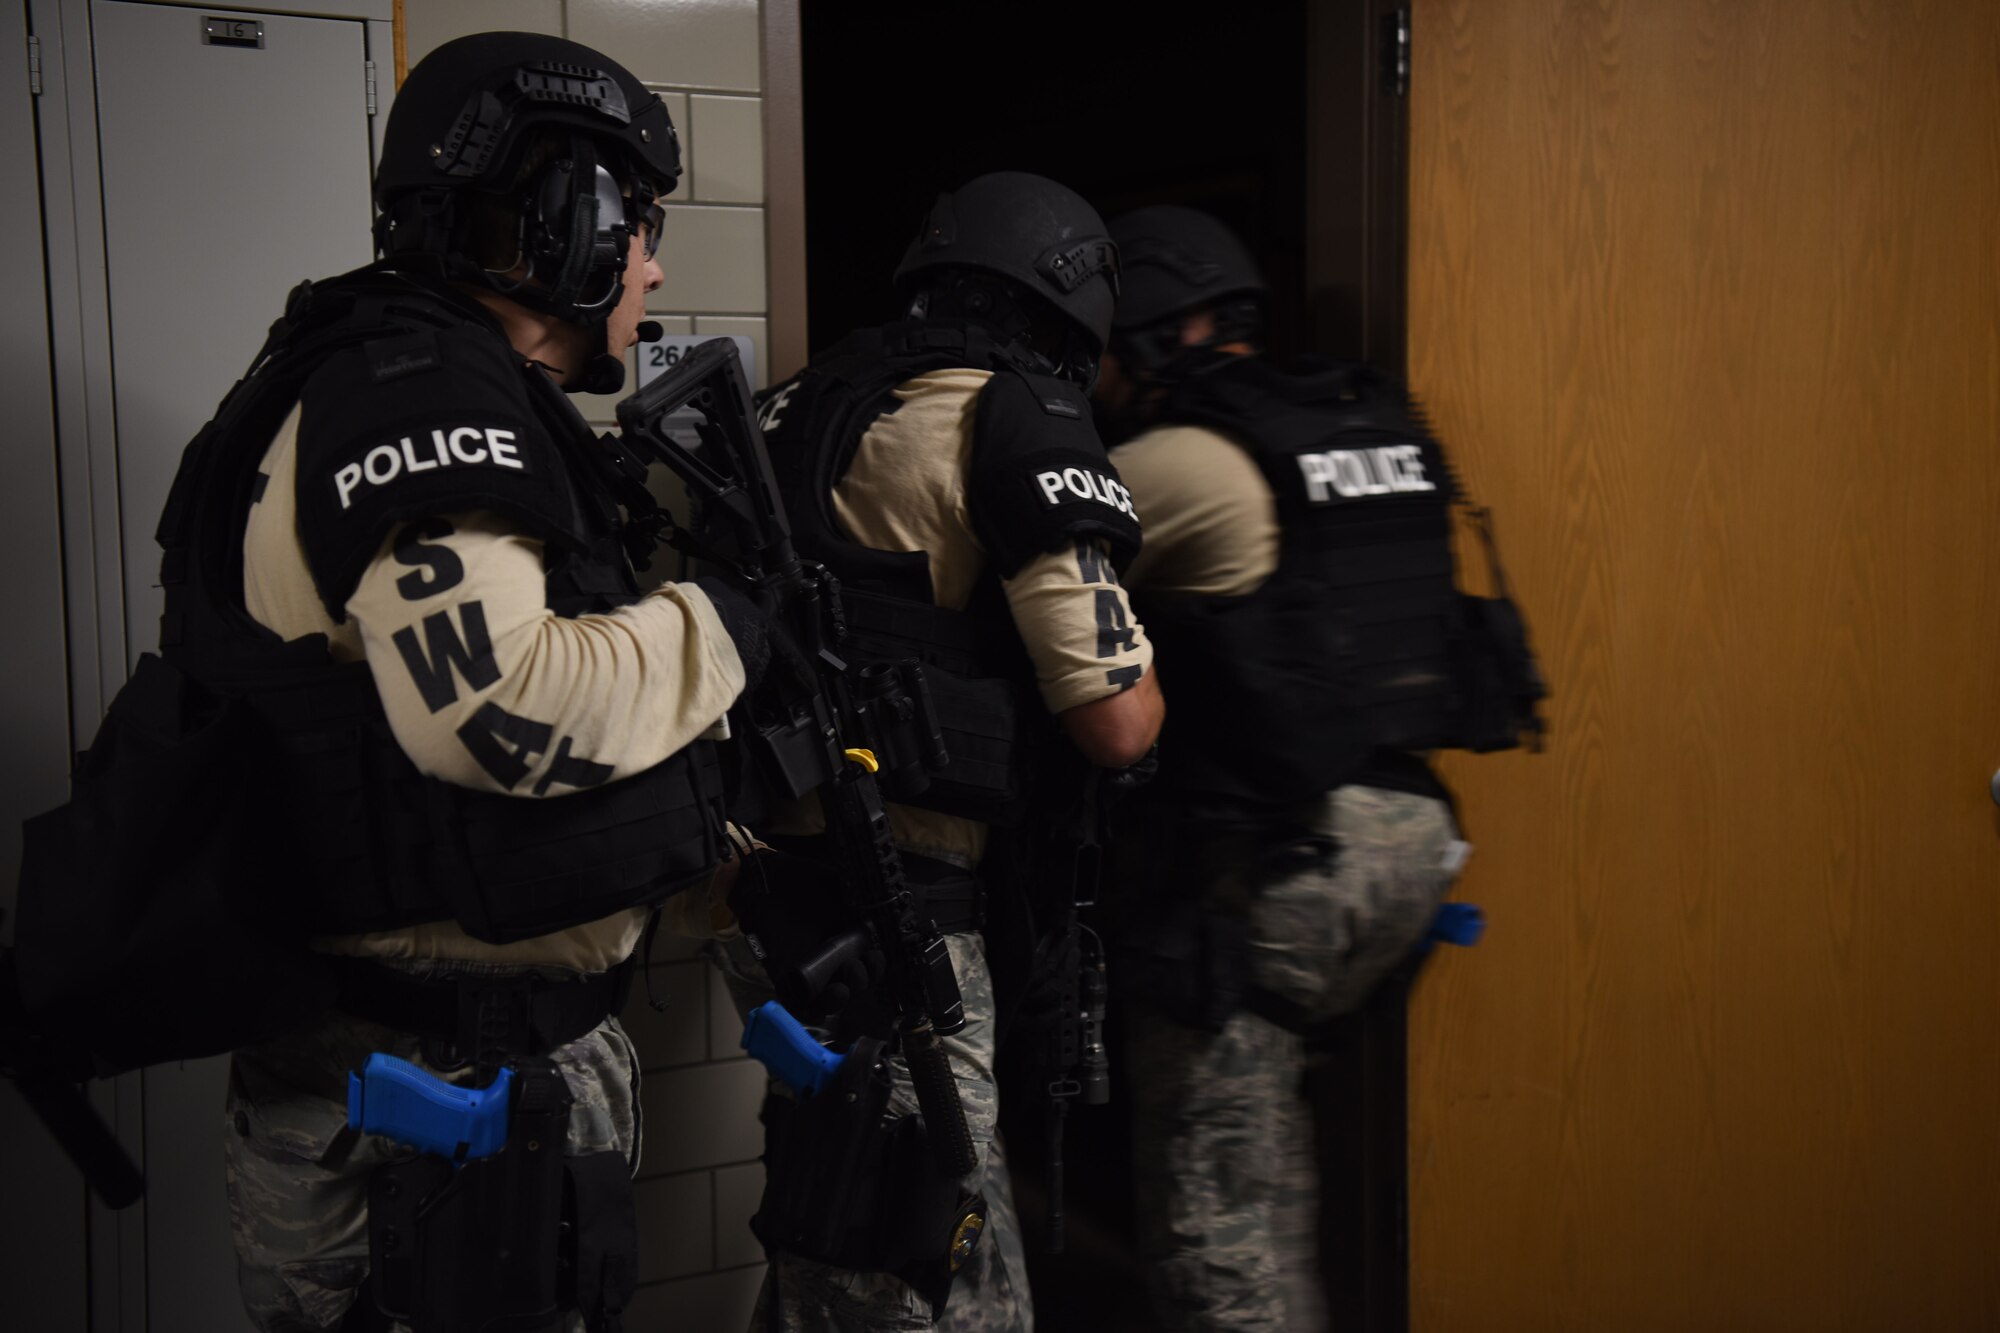 Law enforcement teams practice first-responder duties during an active-shooter exercise August 14, 2018, on Grand Forks Air Force Base, North Dakota. The exercise paired law enforcement and medical units in order to conduct security tactics with rescue actions for wounded exercise participants. (U.S. Air Force photo by Senior Airman Elijaih Tiggs)